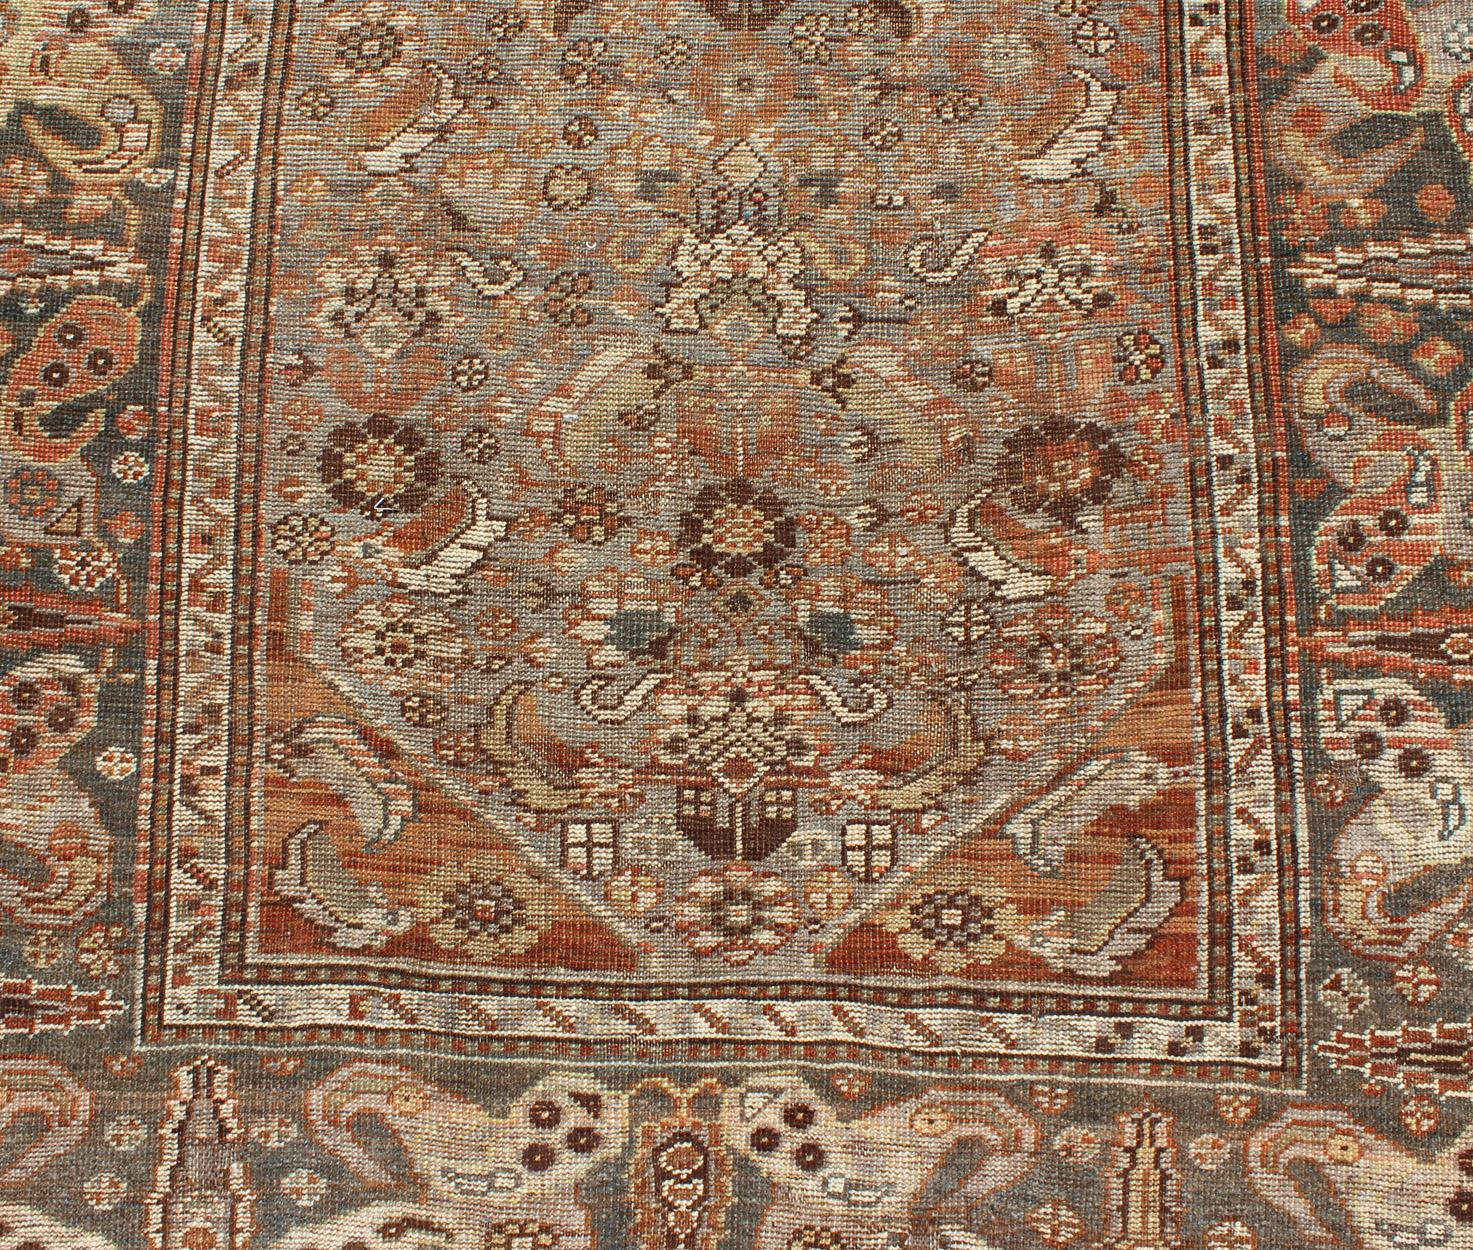 Antique Persian Qashqai Small Gallery Rug with Expansive Sub-Geometric Design 2